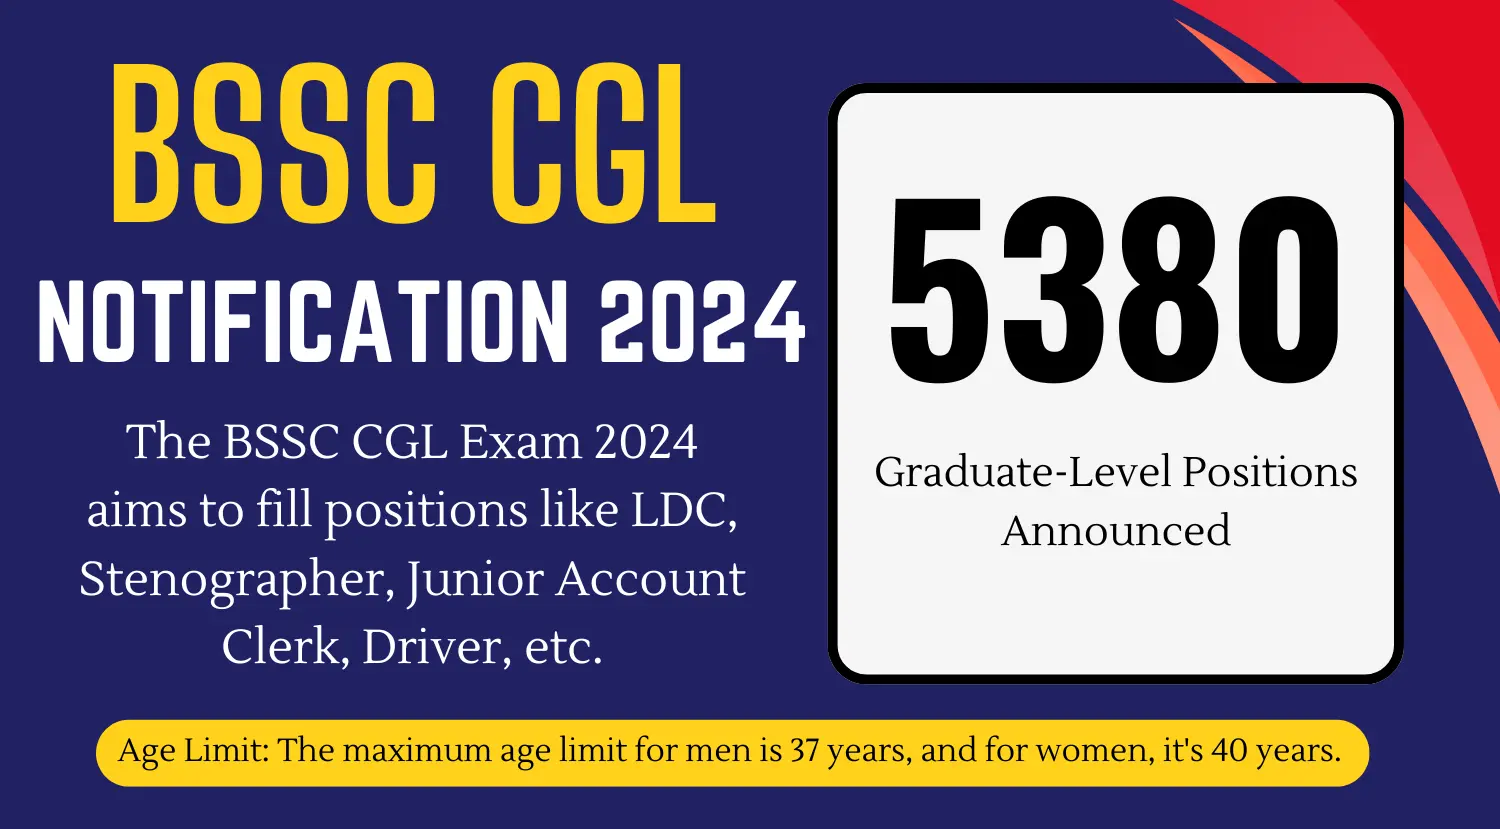 BSSC CGL 2024 Notification 5380 Graduate-Level Positions Announced